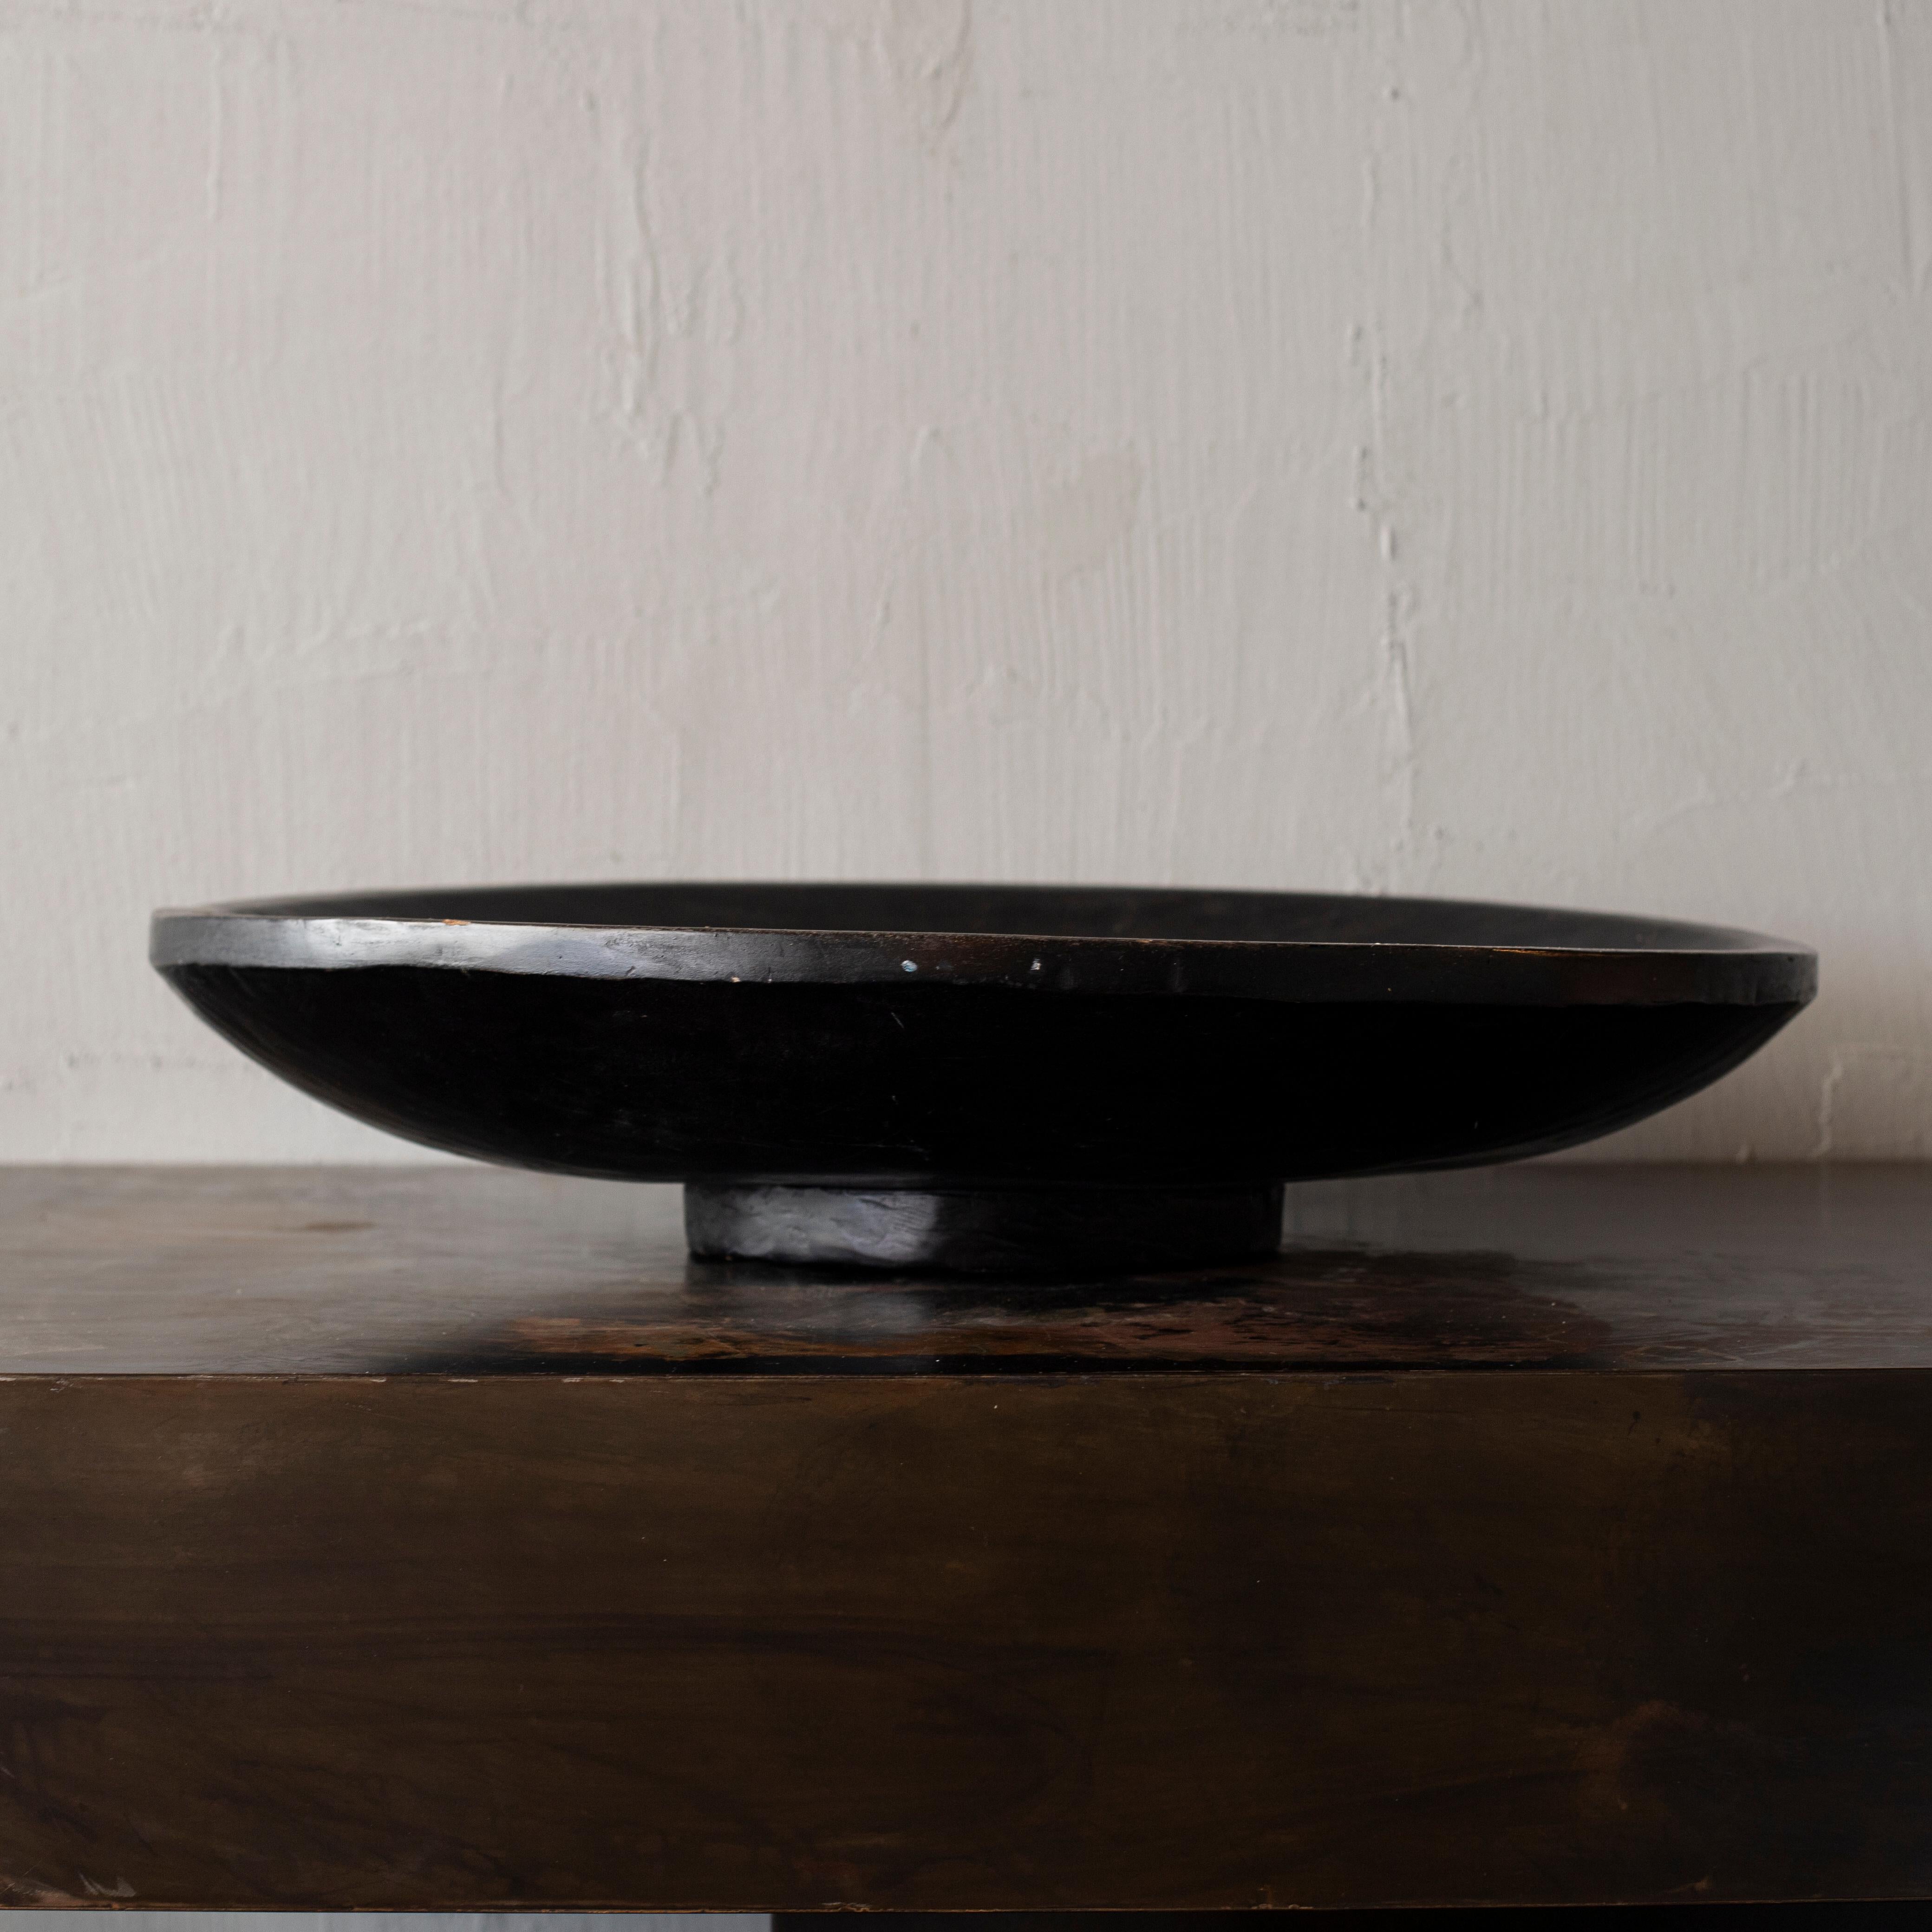 Hand-curved wooden bowl from Indonesia.
Made with teak wood.
Weight: 10kg.